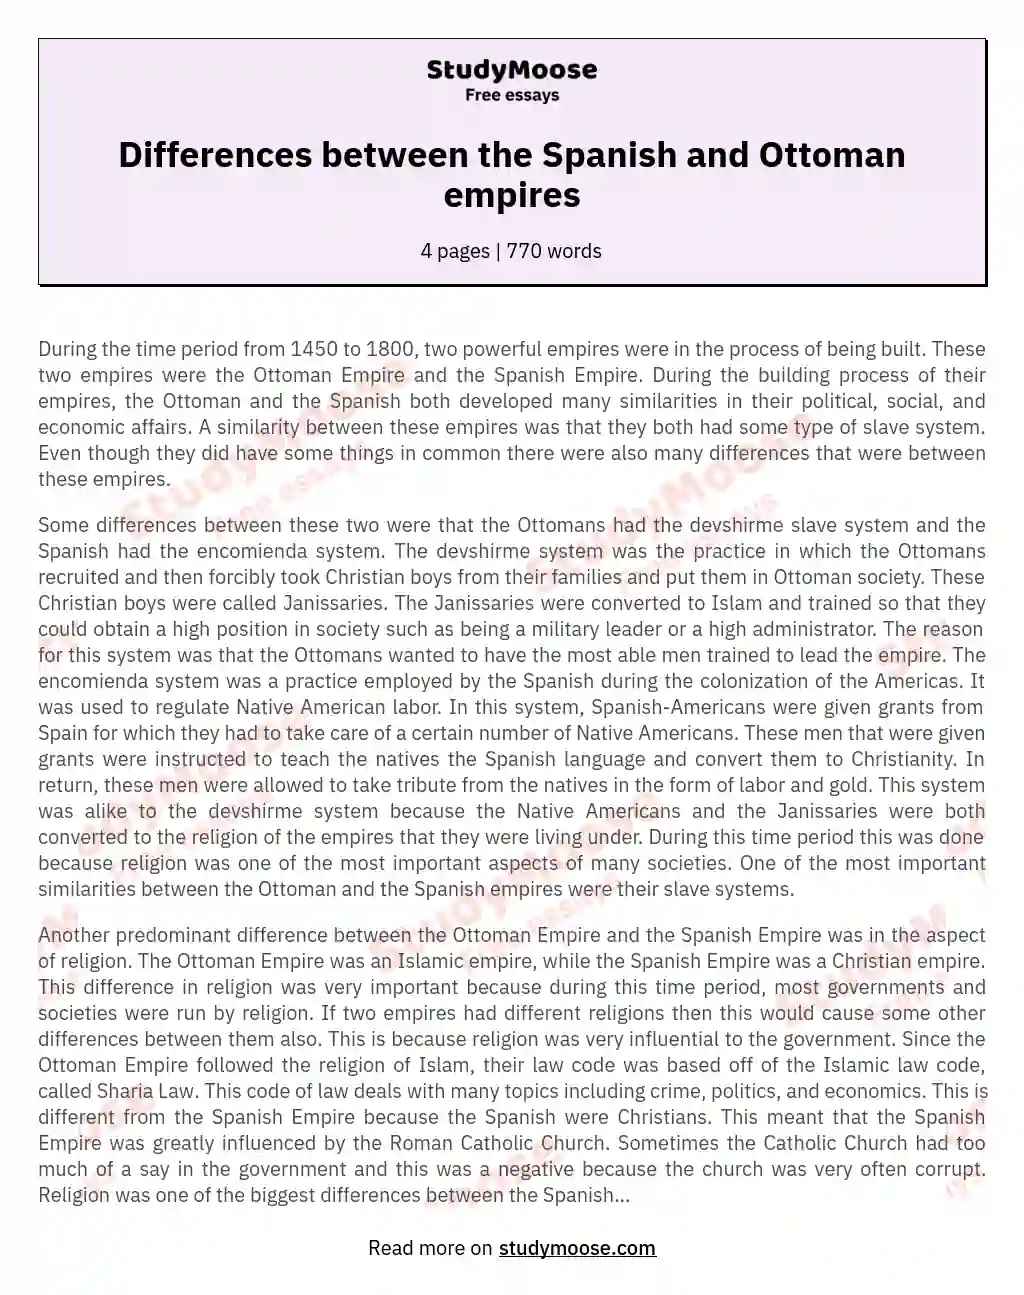 Differences between the Spanish and Ottoman empires